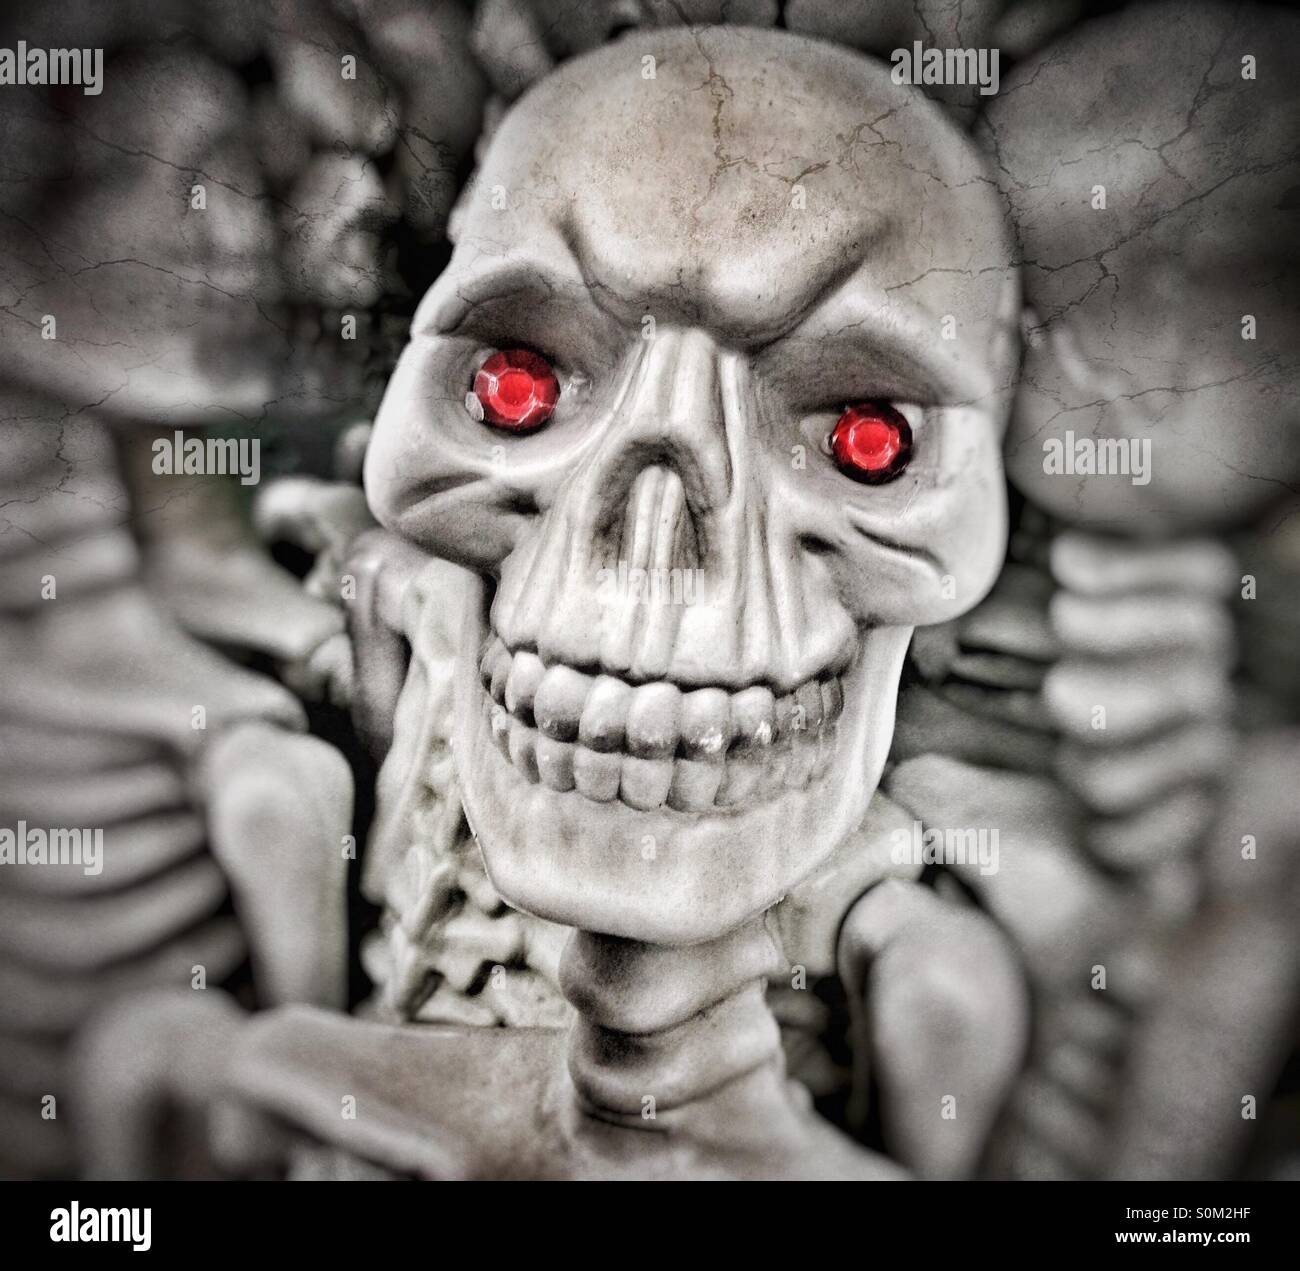 Scary Skeleton With Red Eyes Stock Photo - Alamy